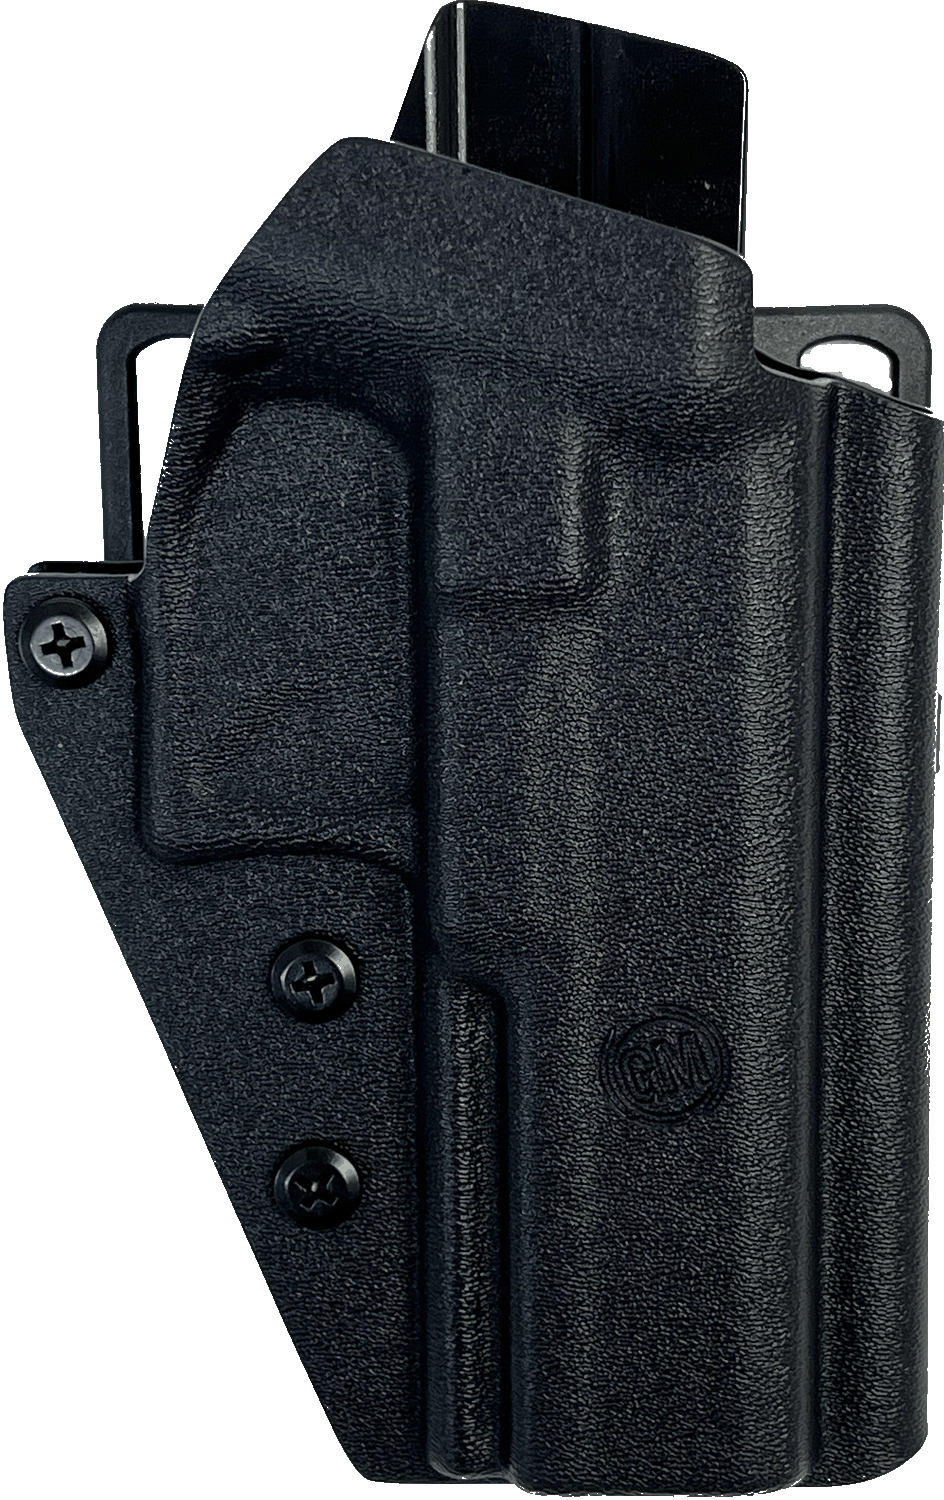 203895_holster-walther-pdp-4,5-zoll_1